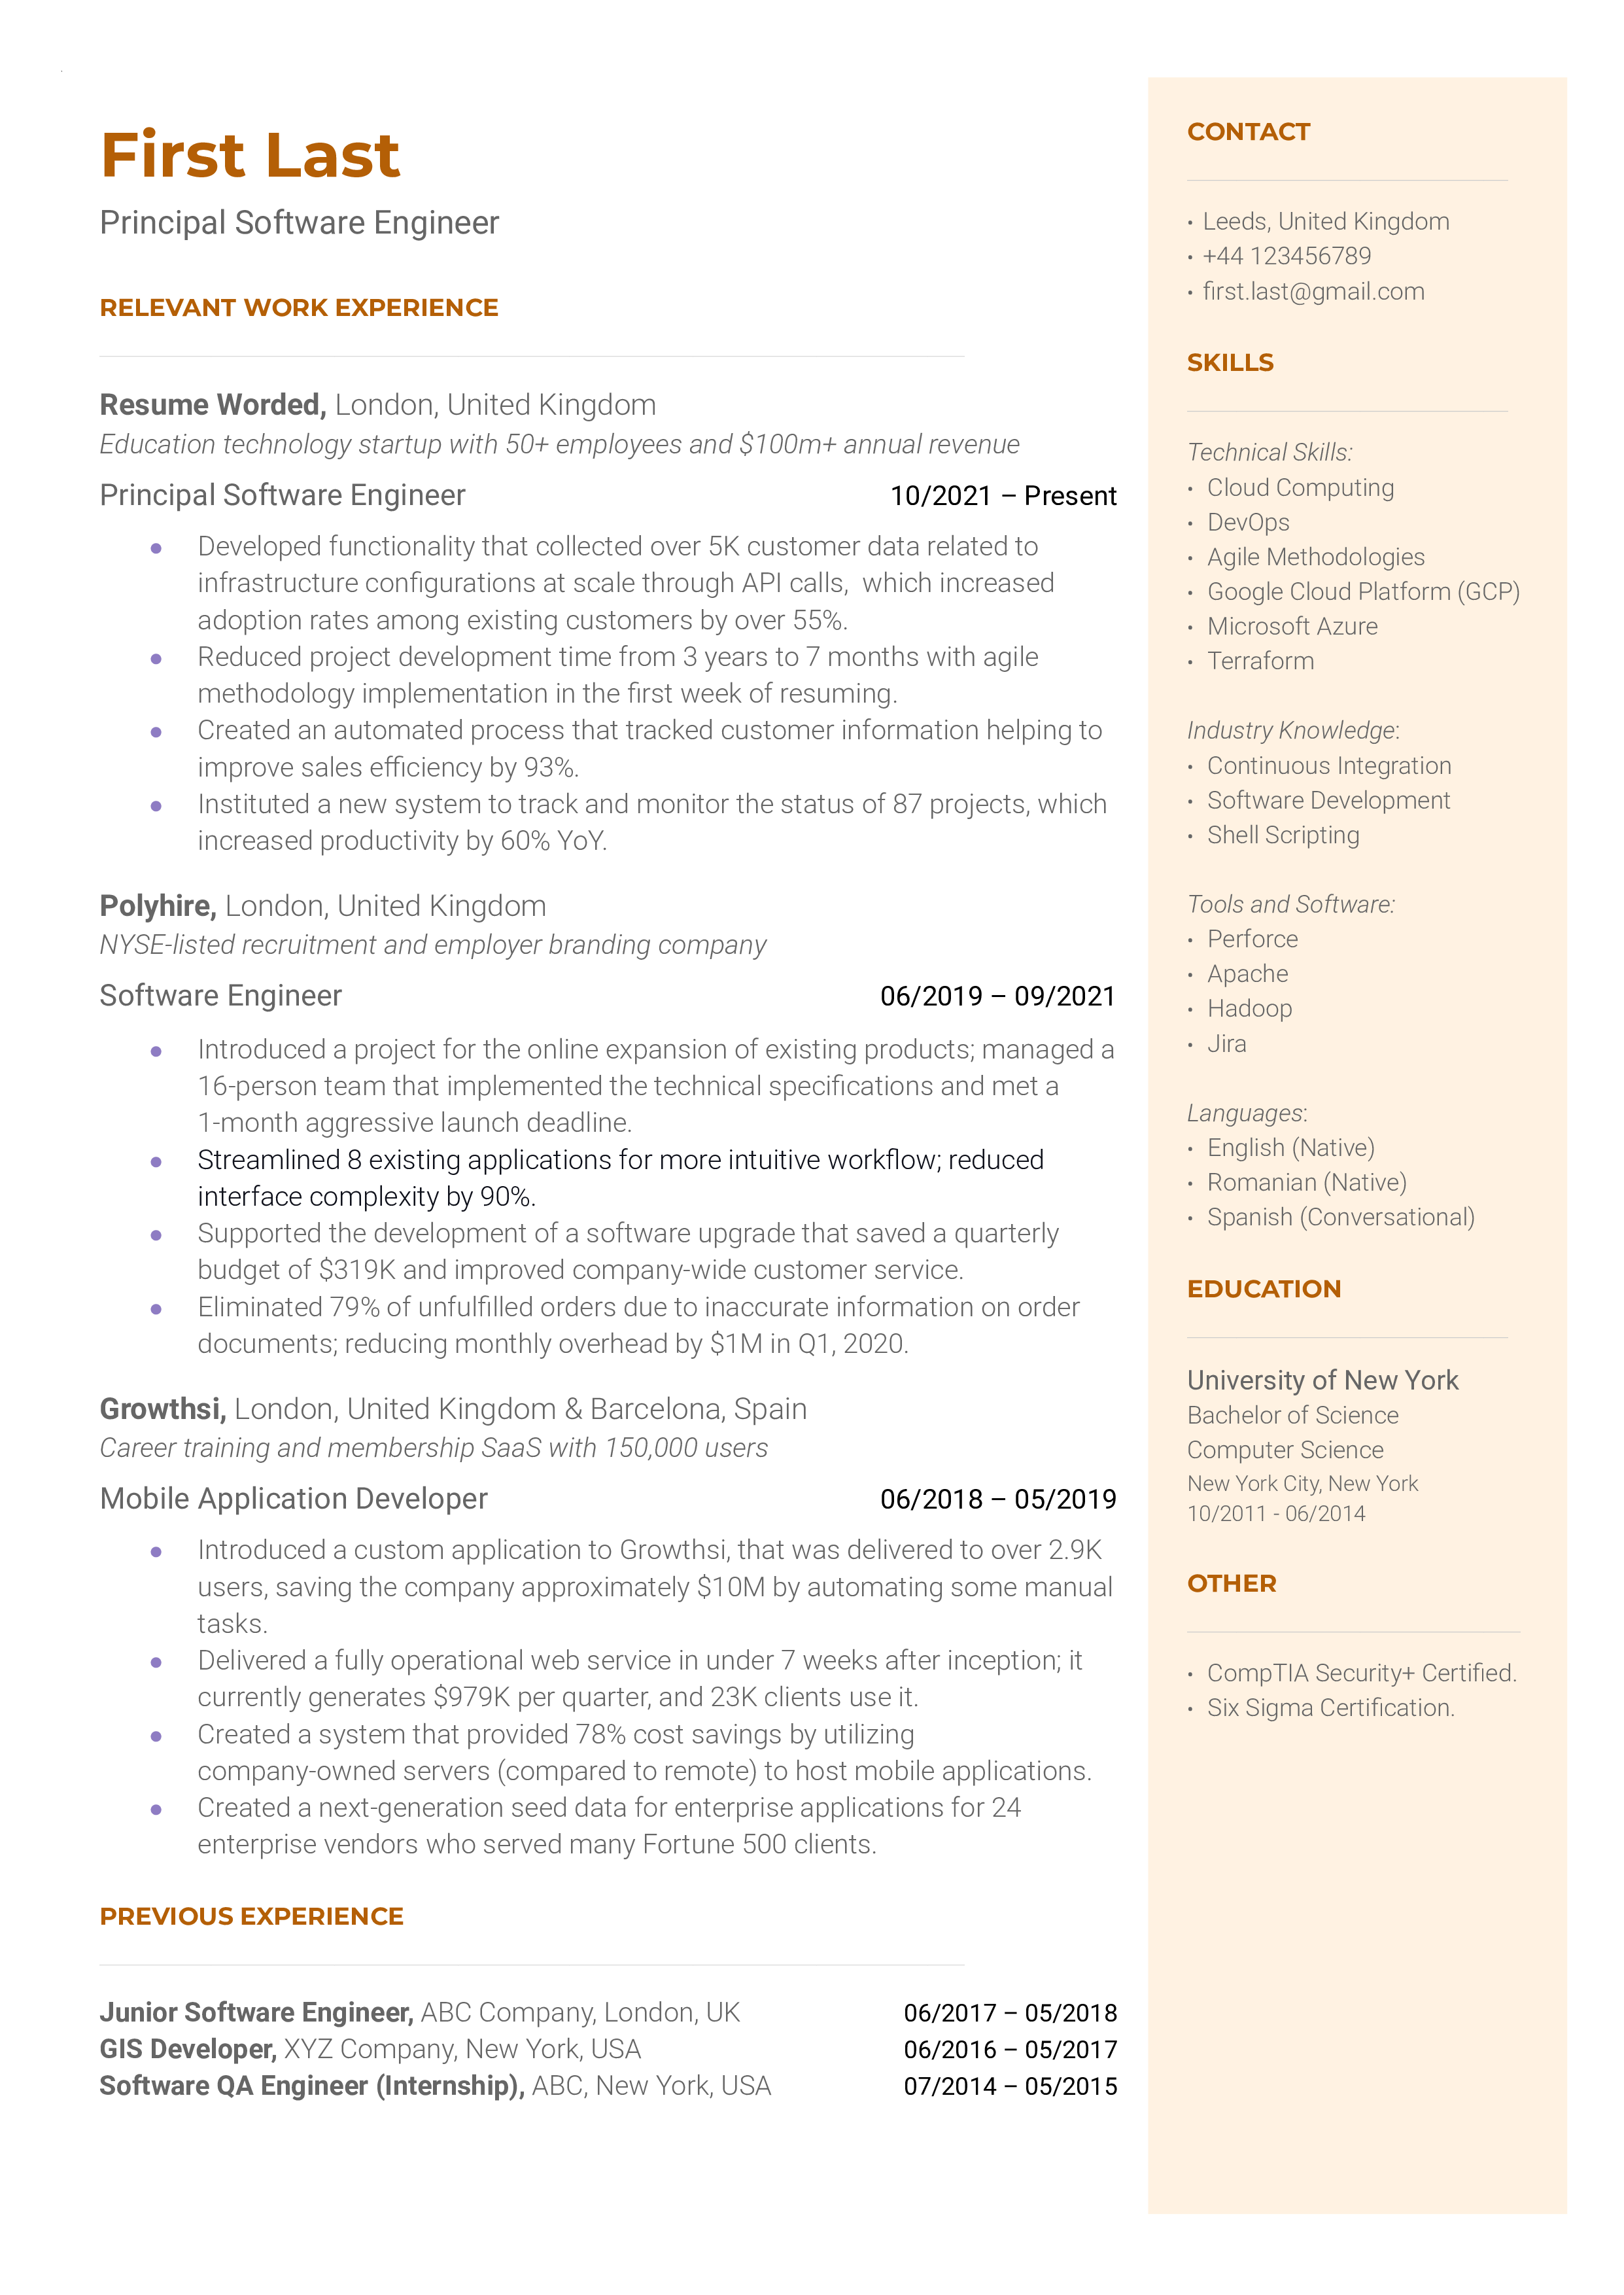 A principal software engineer resume sample that highlights the applicant’s leadership and communication skills.